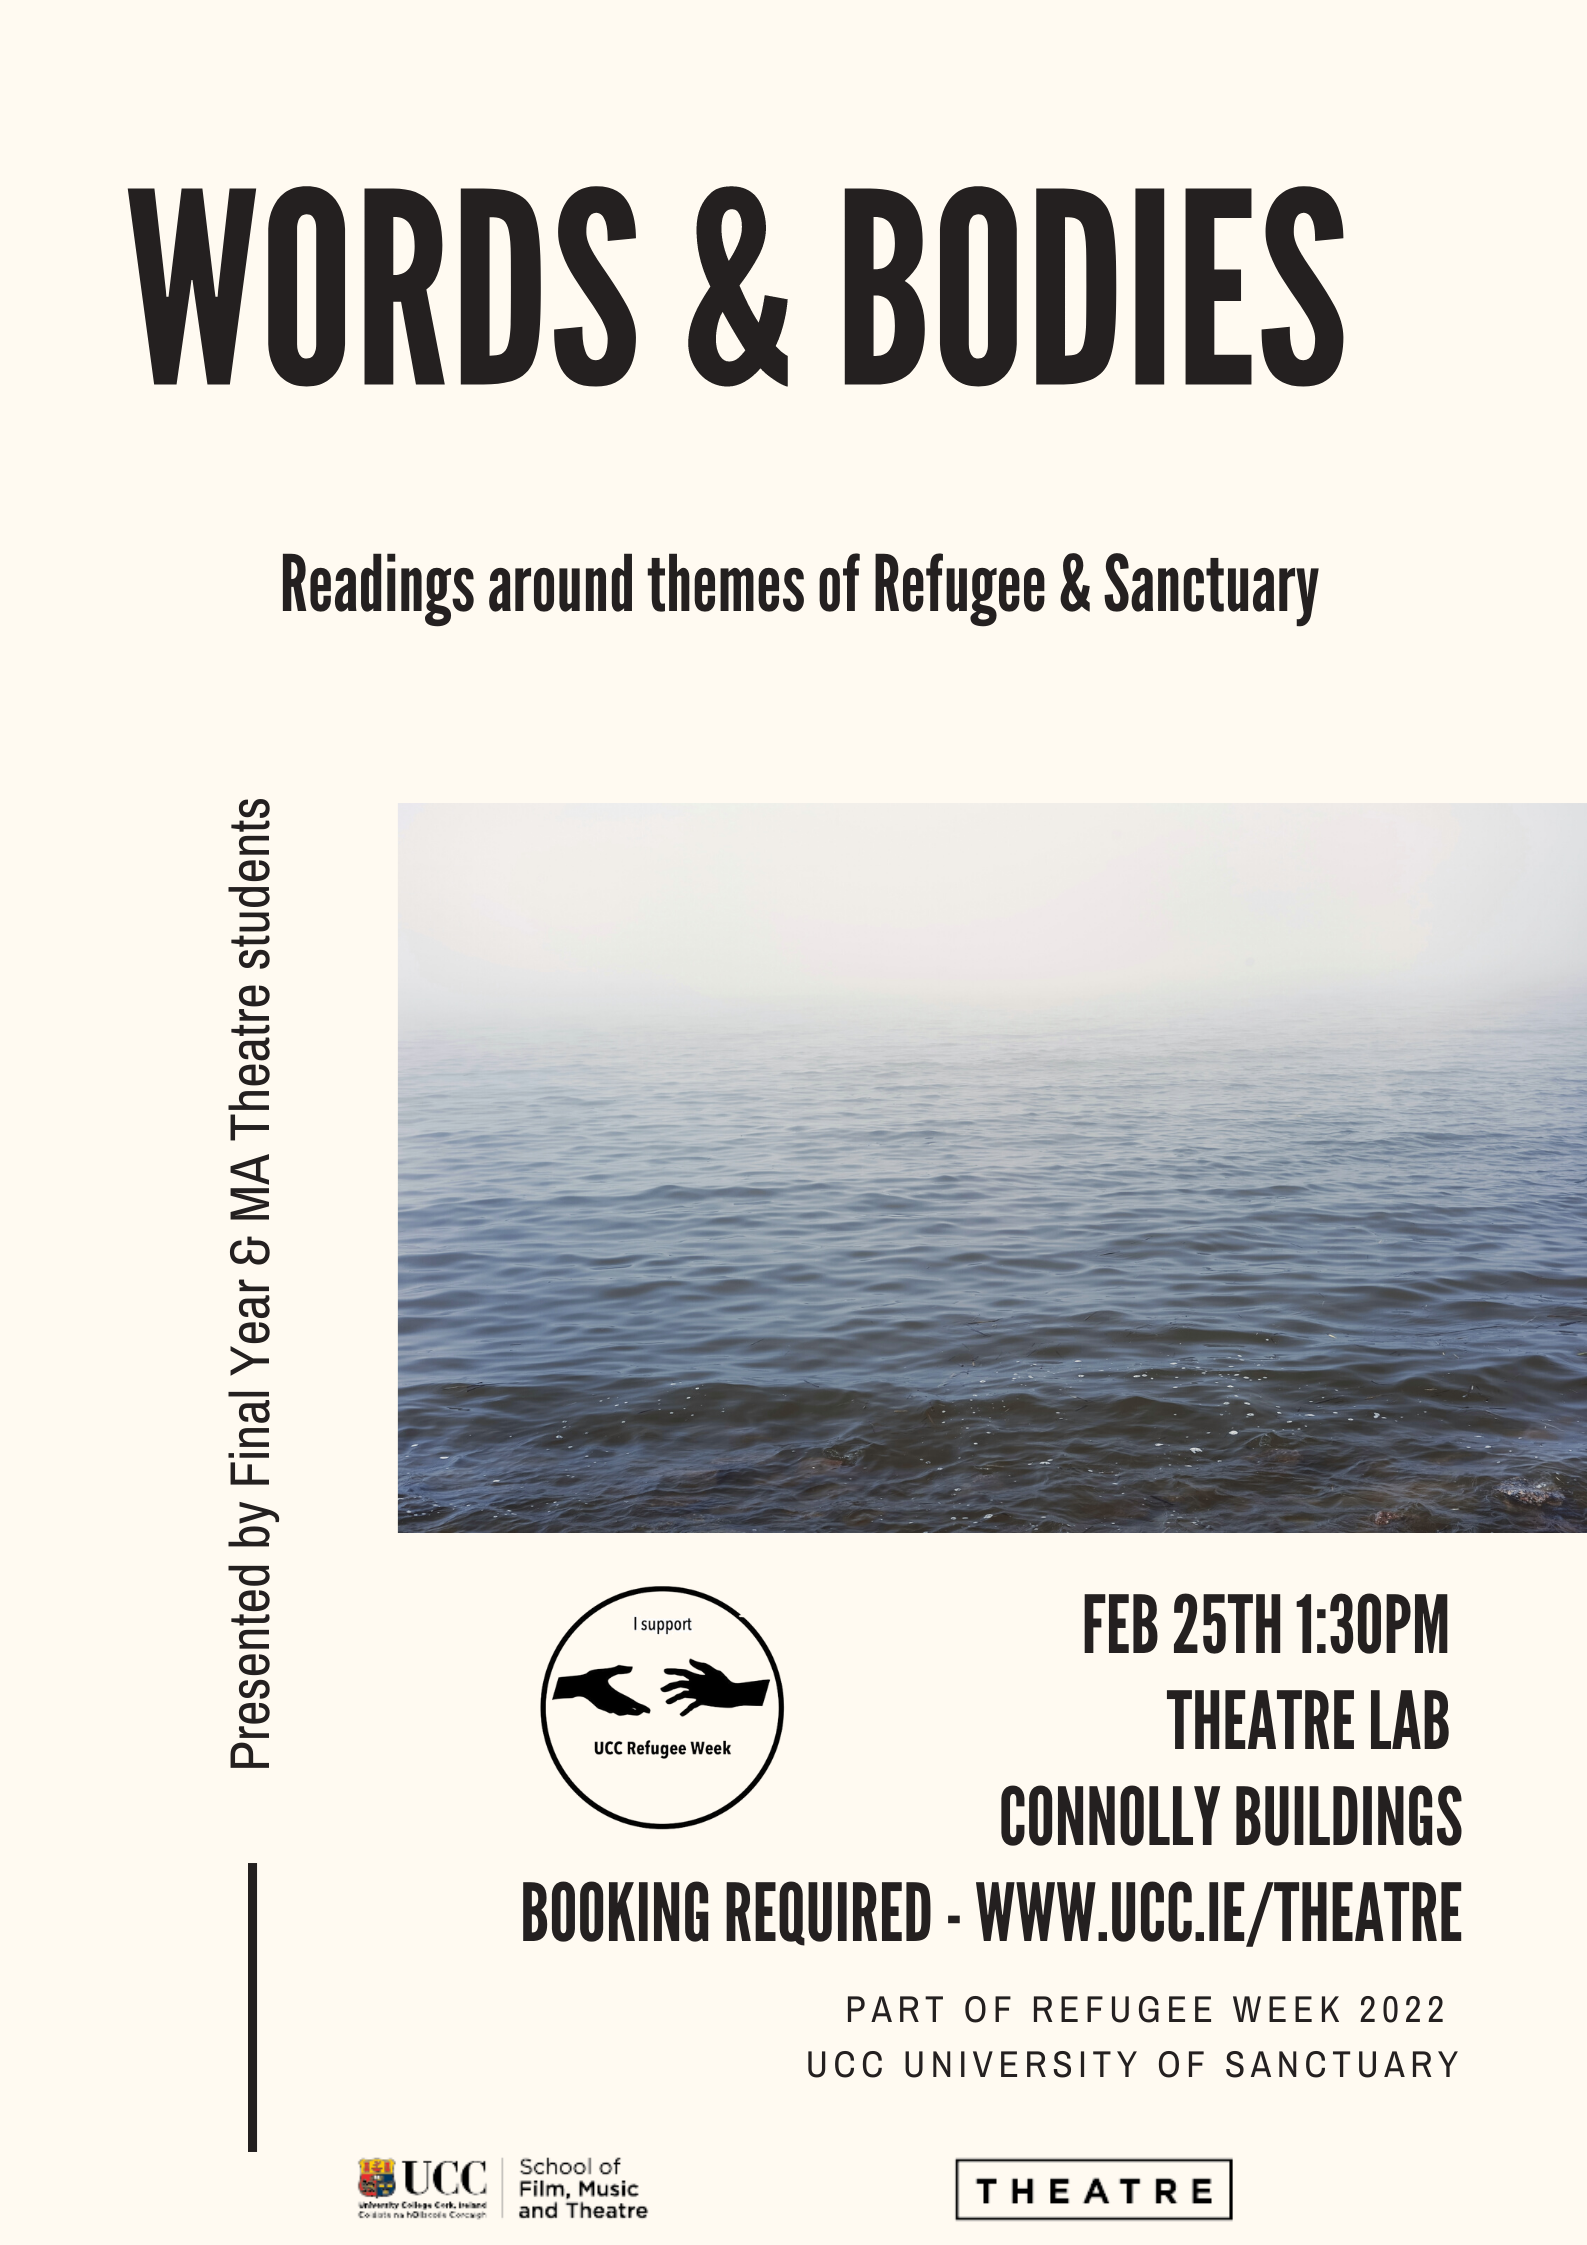 Words + Bodies - Readings in the Theatre Lab as part of Refugee Week